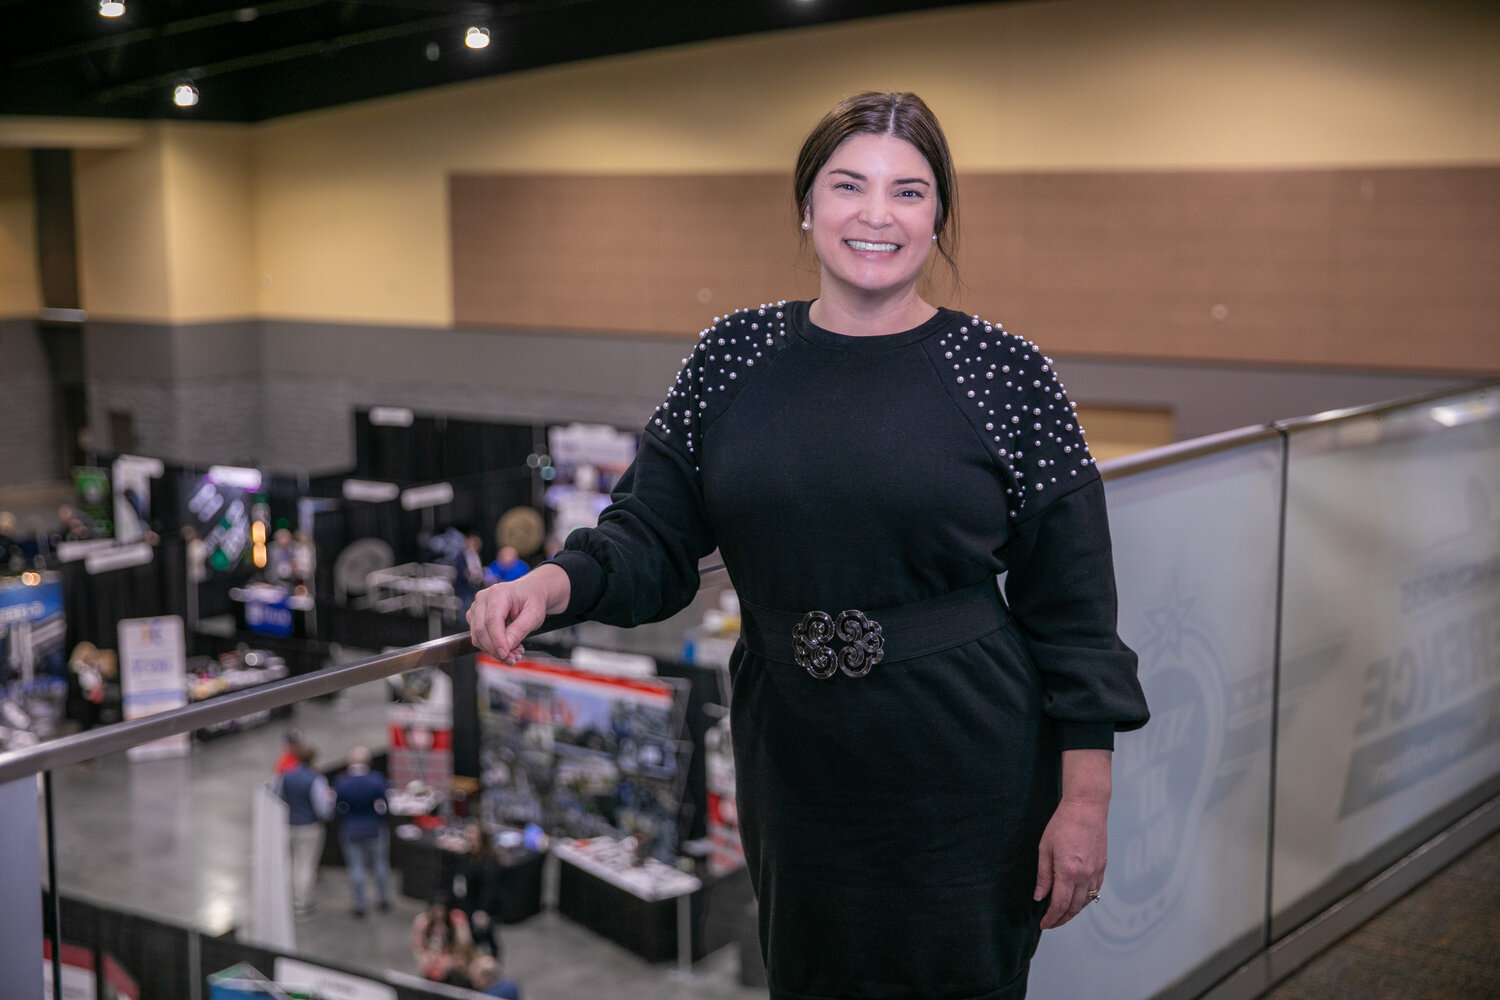 BUSINESS BOOMING: Angie Teel, general manager of the Branson Convention Center, says the facility has something happening on 85% of days of the year, on average.